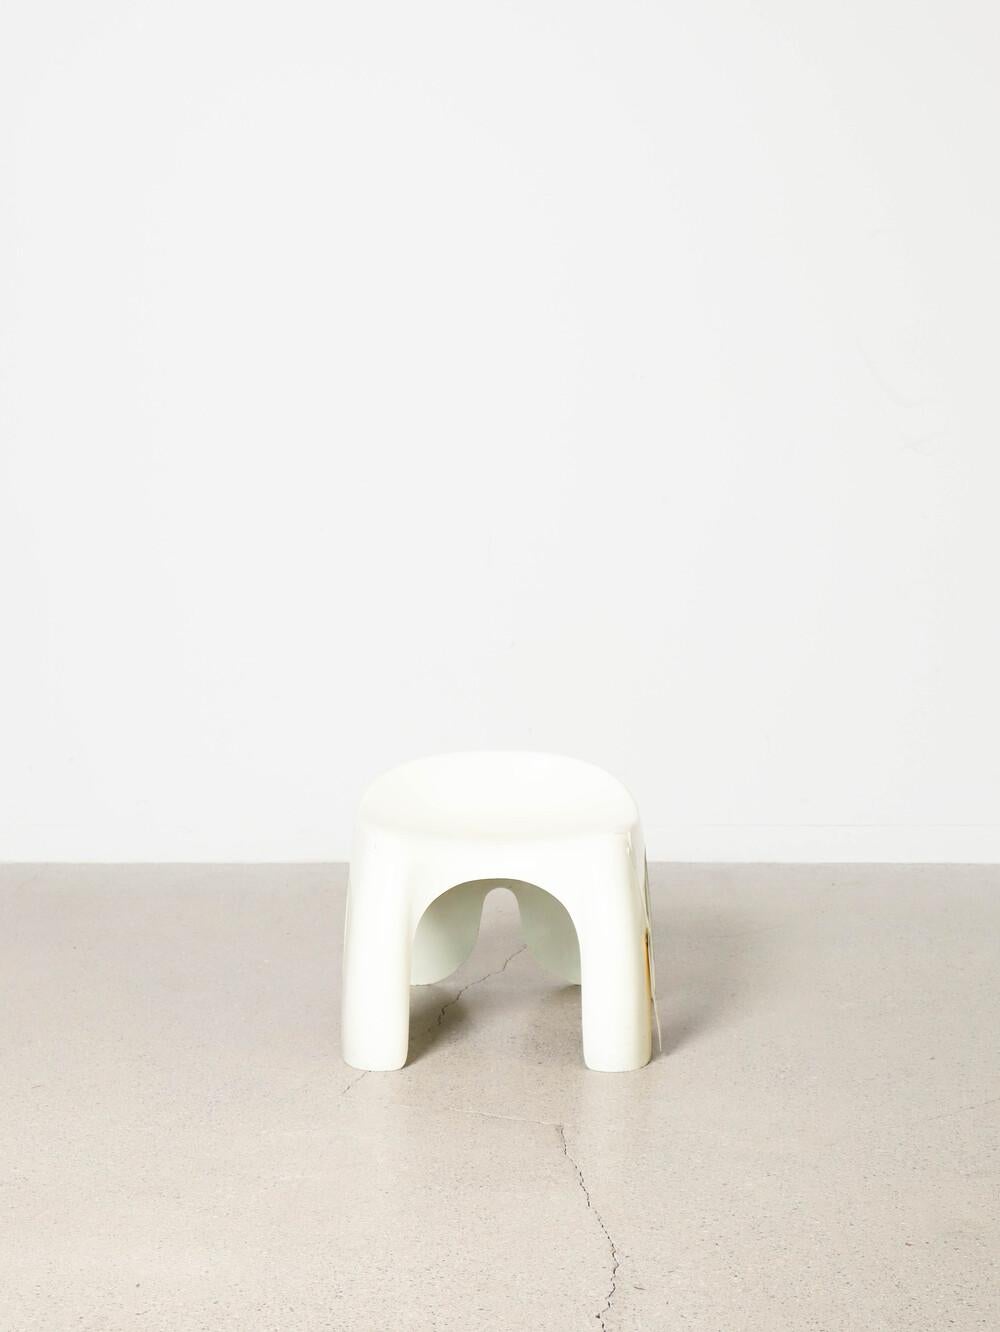 Space Age Efebo Plastic Stool by Stacy Dukes for Artemide